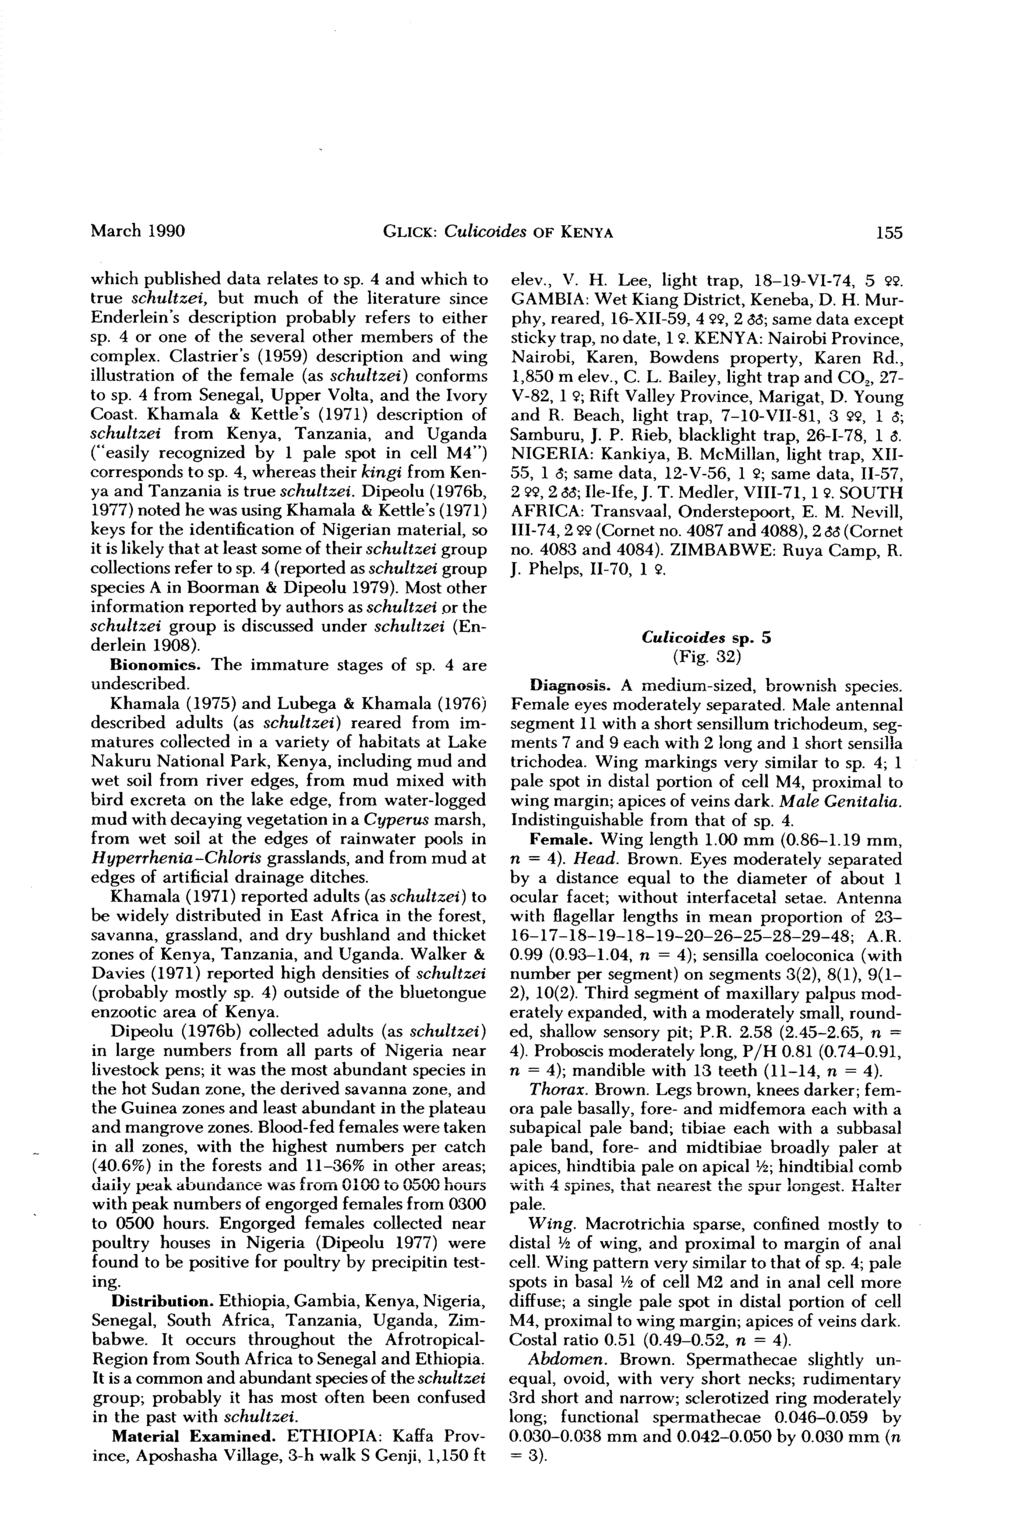 March 1990 GLICK: Culicoides OF KENYA 155 which published data relates to sp. 4 and which to true schultzi, but much of the literature since Enderlein s description probably refers to either sp.